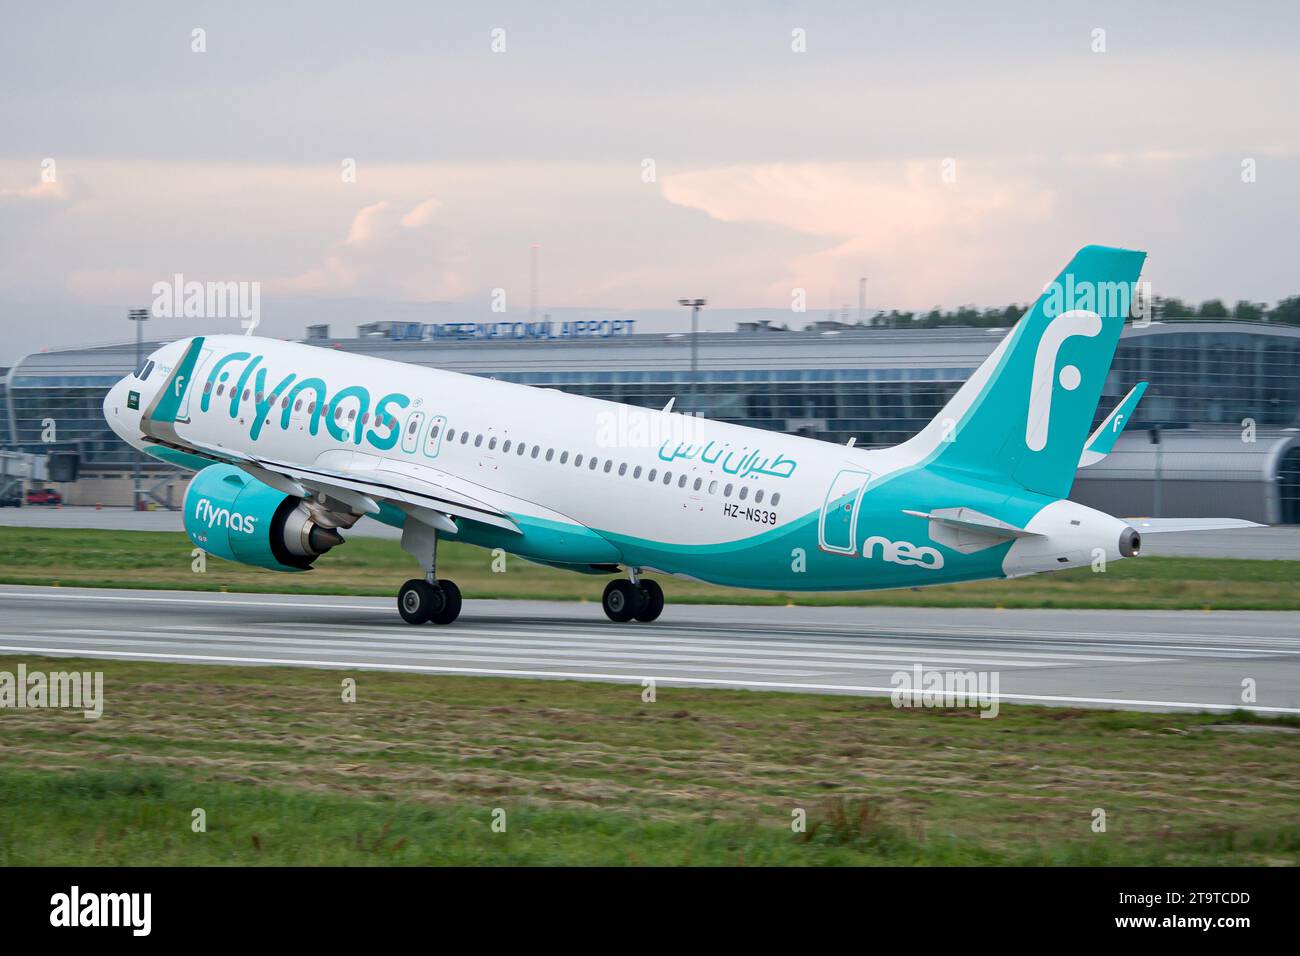 Saudi airline's Flynas Airbus A320 NEO taking off from Lviv for a flight to Riyadh Stock Photo